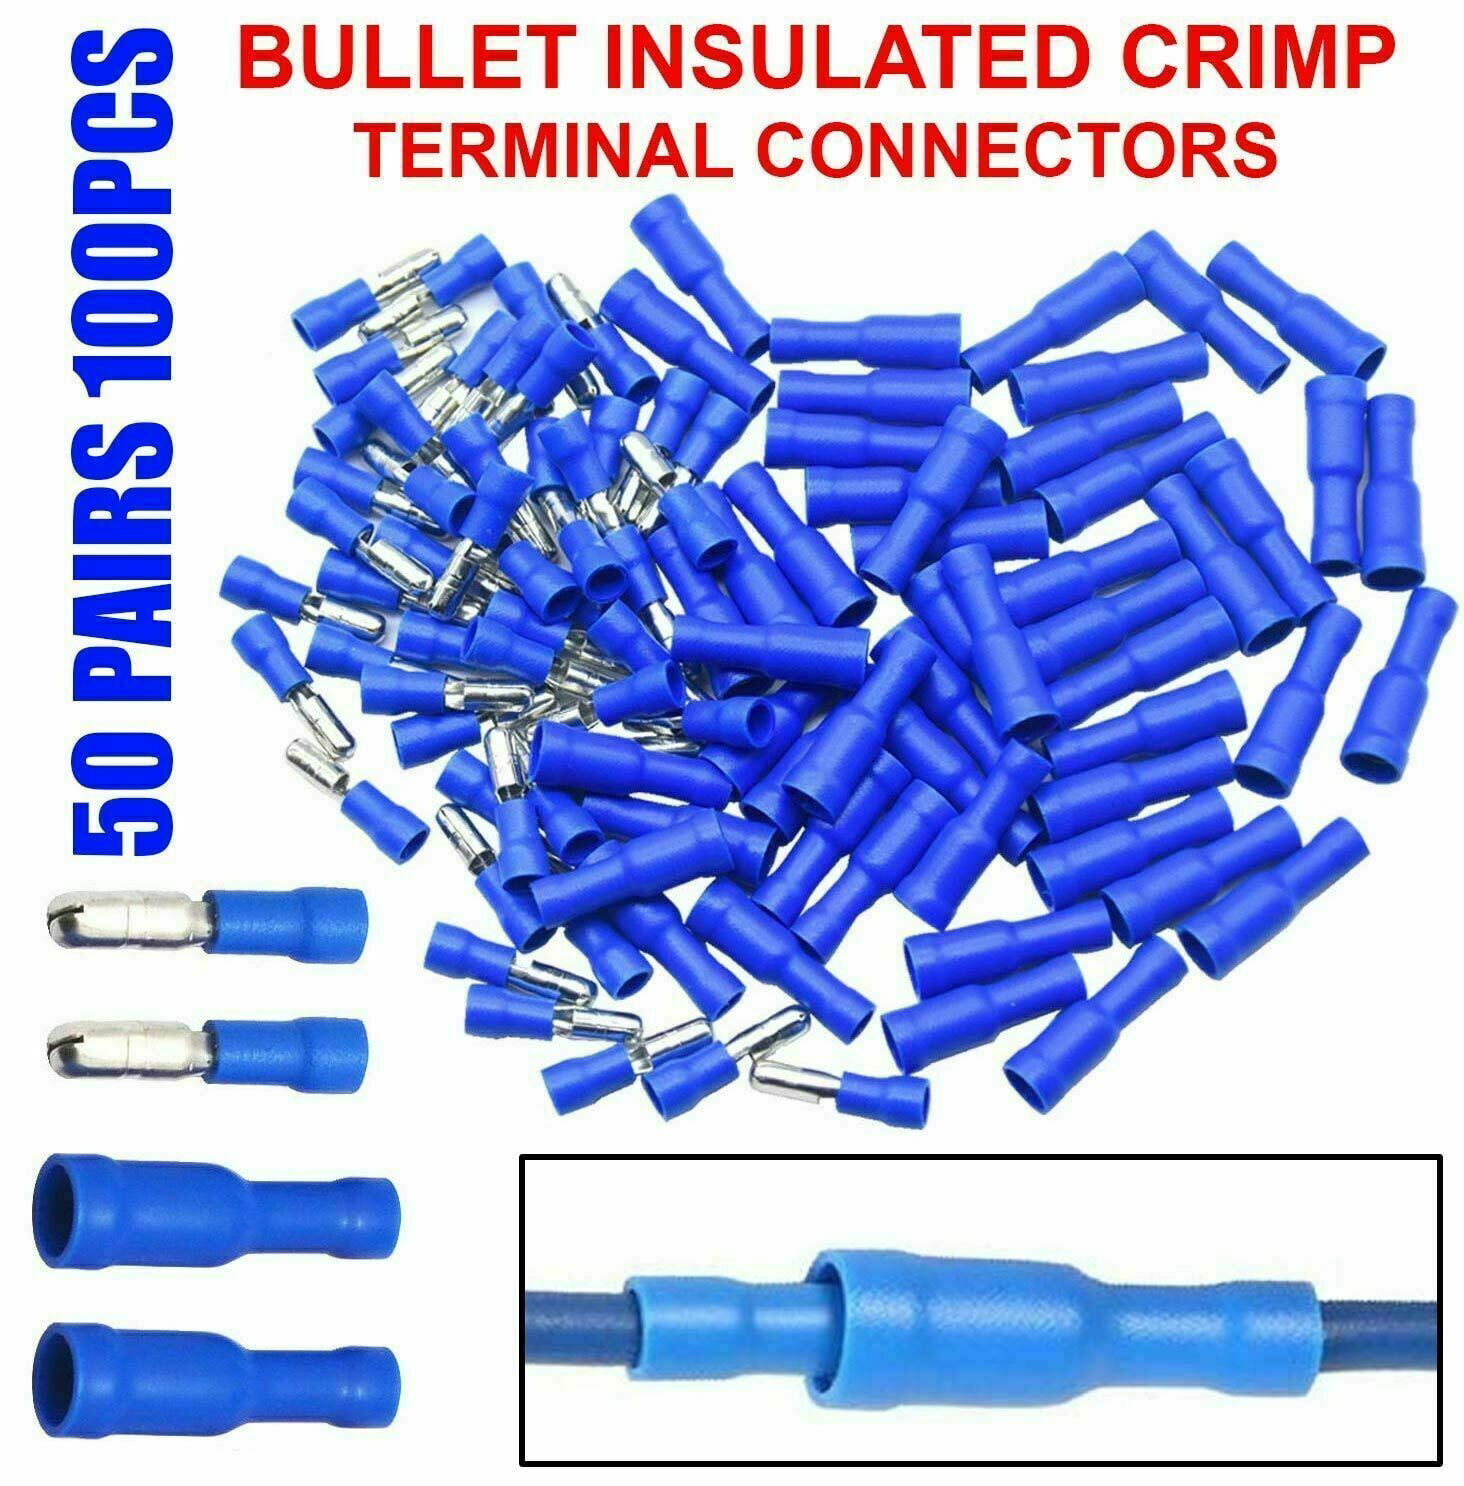 20 Insulated Bullet Terminals Receptacles Electrical Splice Crimp Wire Terminal 